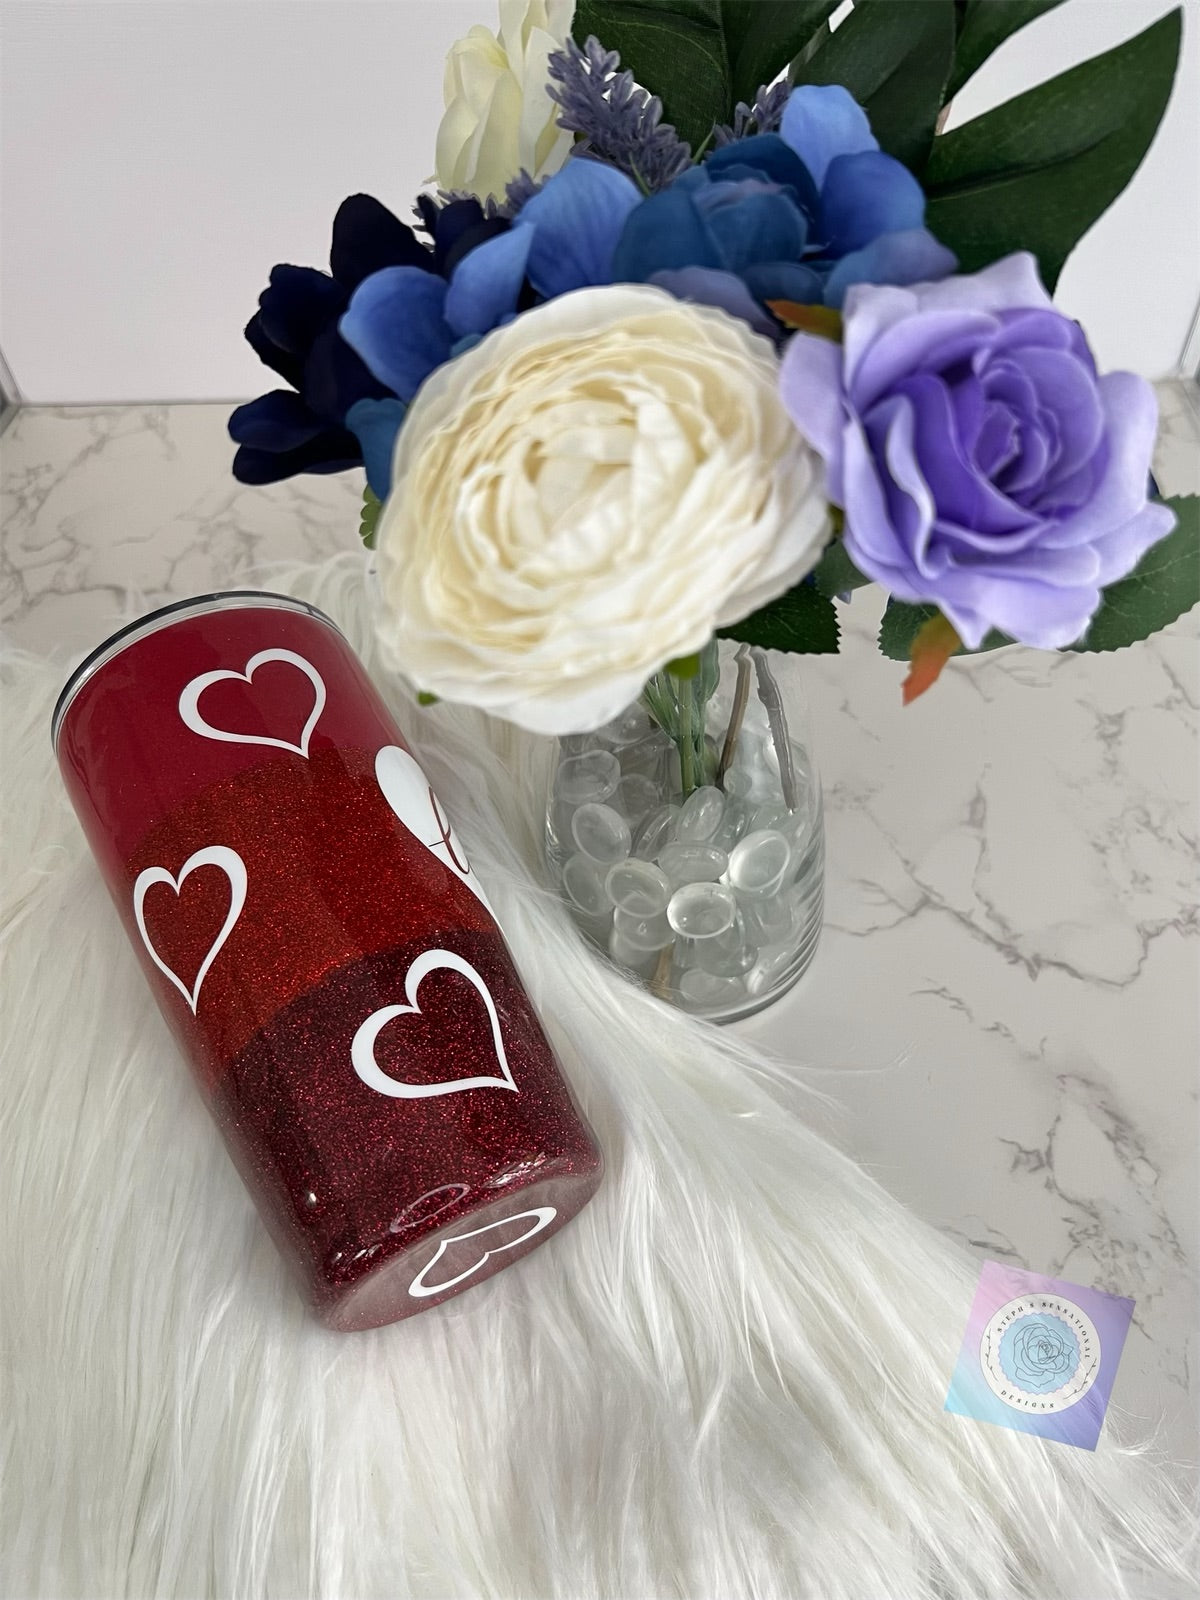 20 oz "Love hearts" Stainless Steel Tumblers